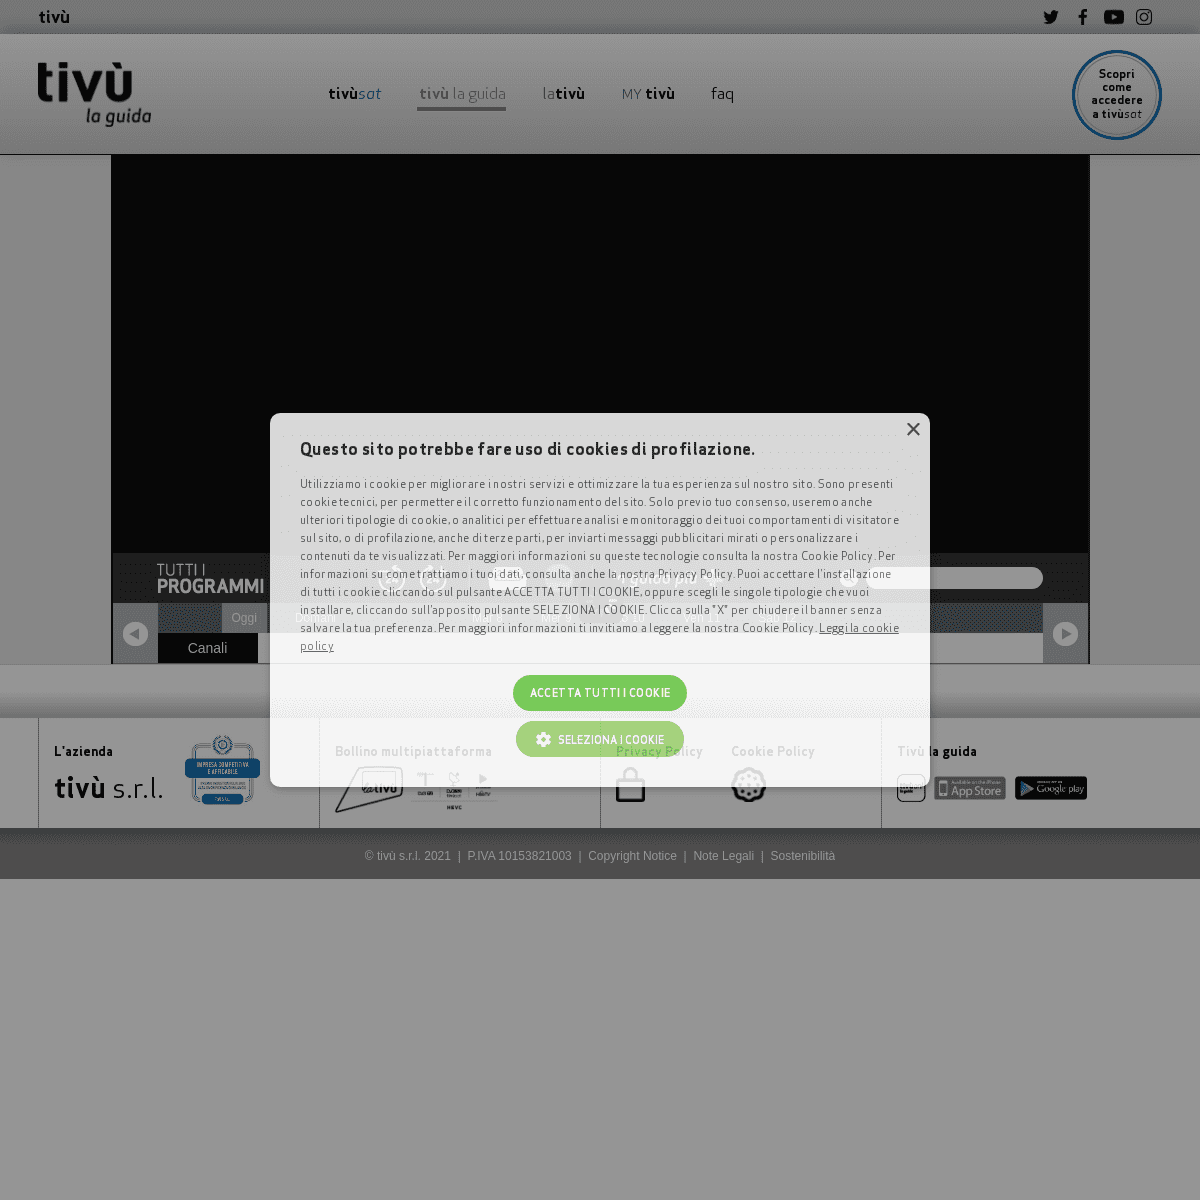 A complete backup of https://tivu.tv